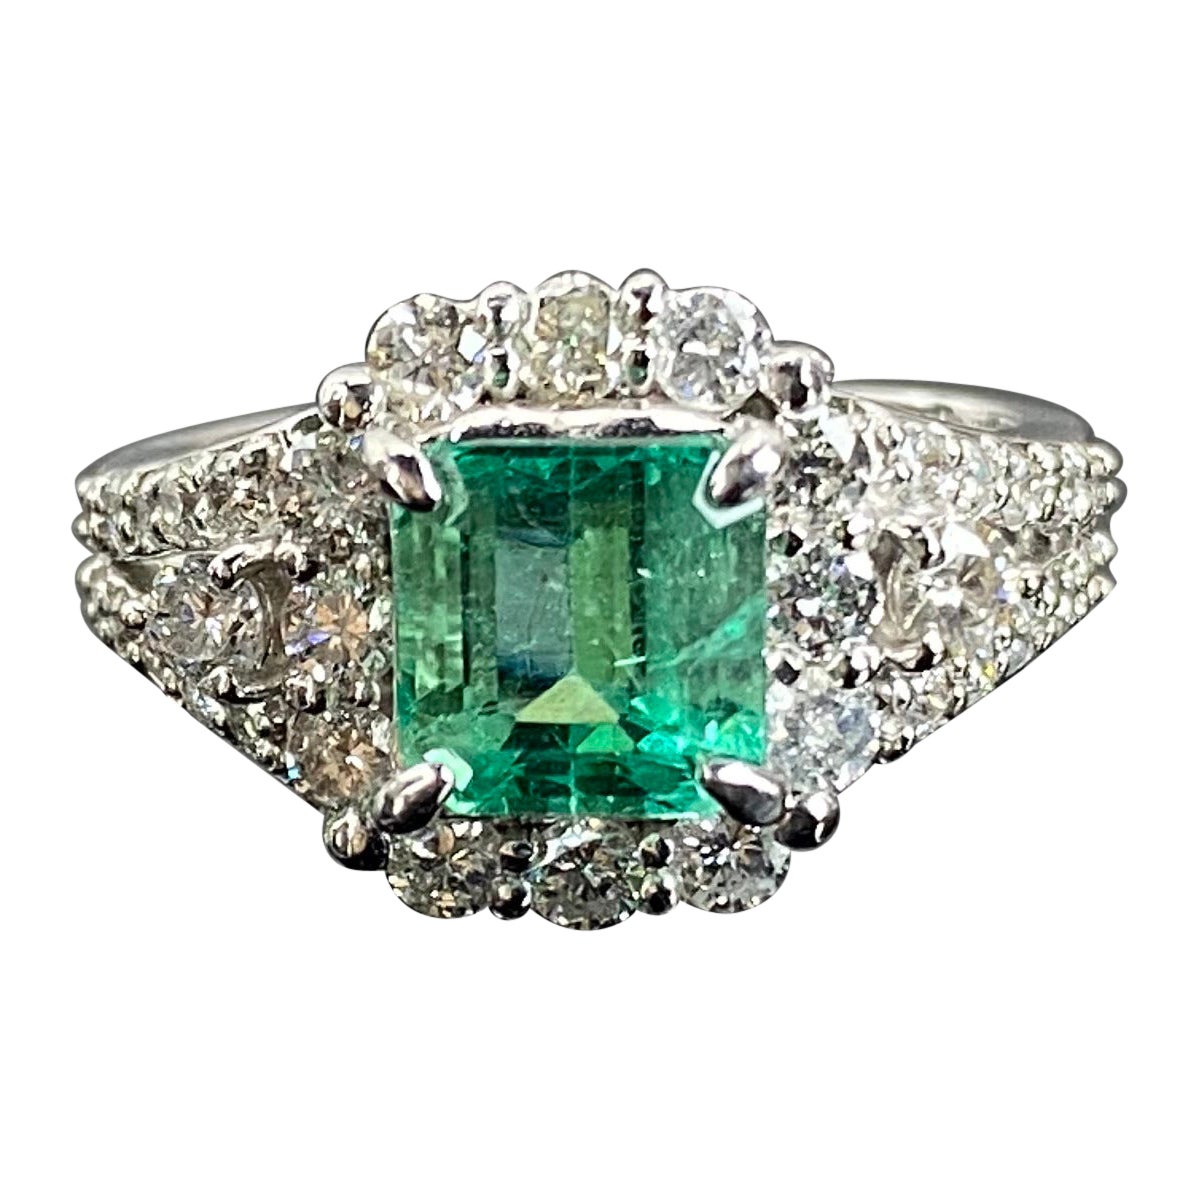 Certified 1.53 Carat Emerald and Diamond Engagement Ring